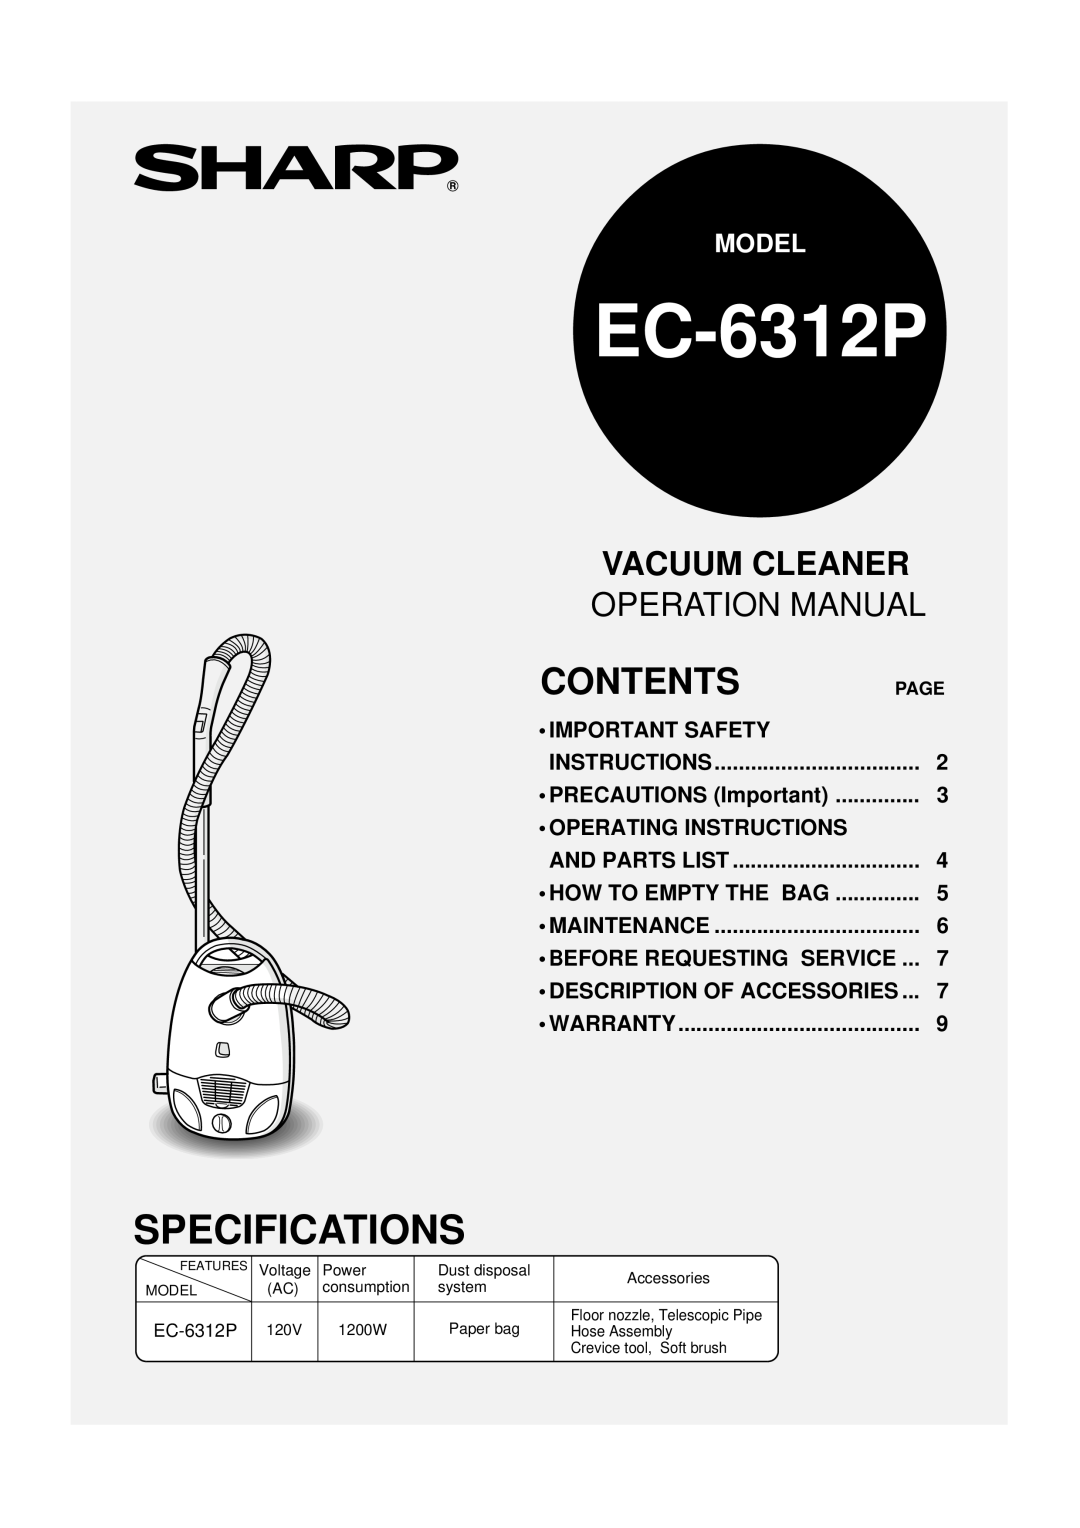 Sharp EC-6312P operation manual Specifications, Contents, Vacuum Cleaner, Model 